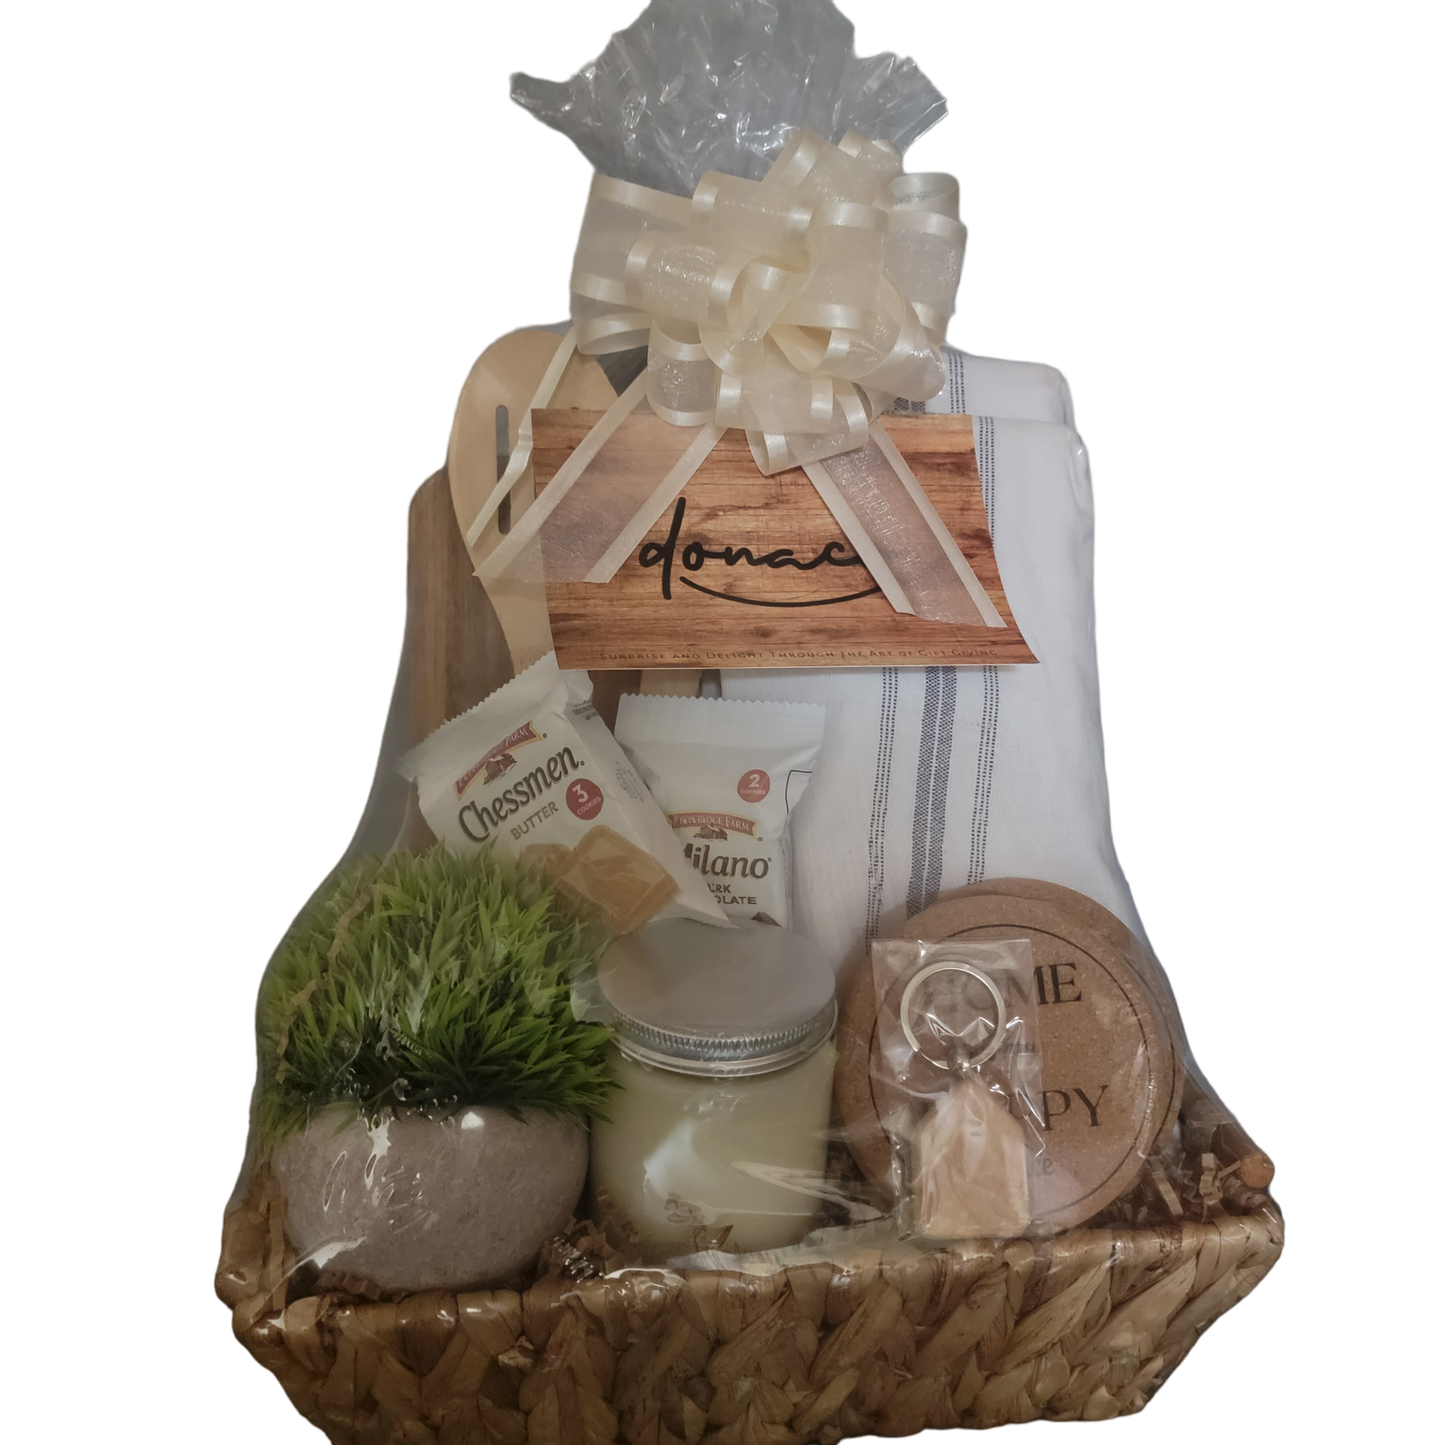 Welcome Home Gift Basket